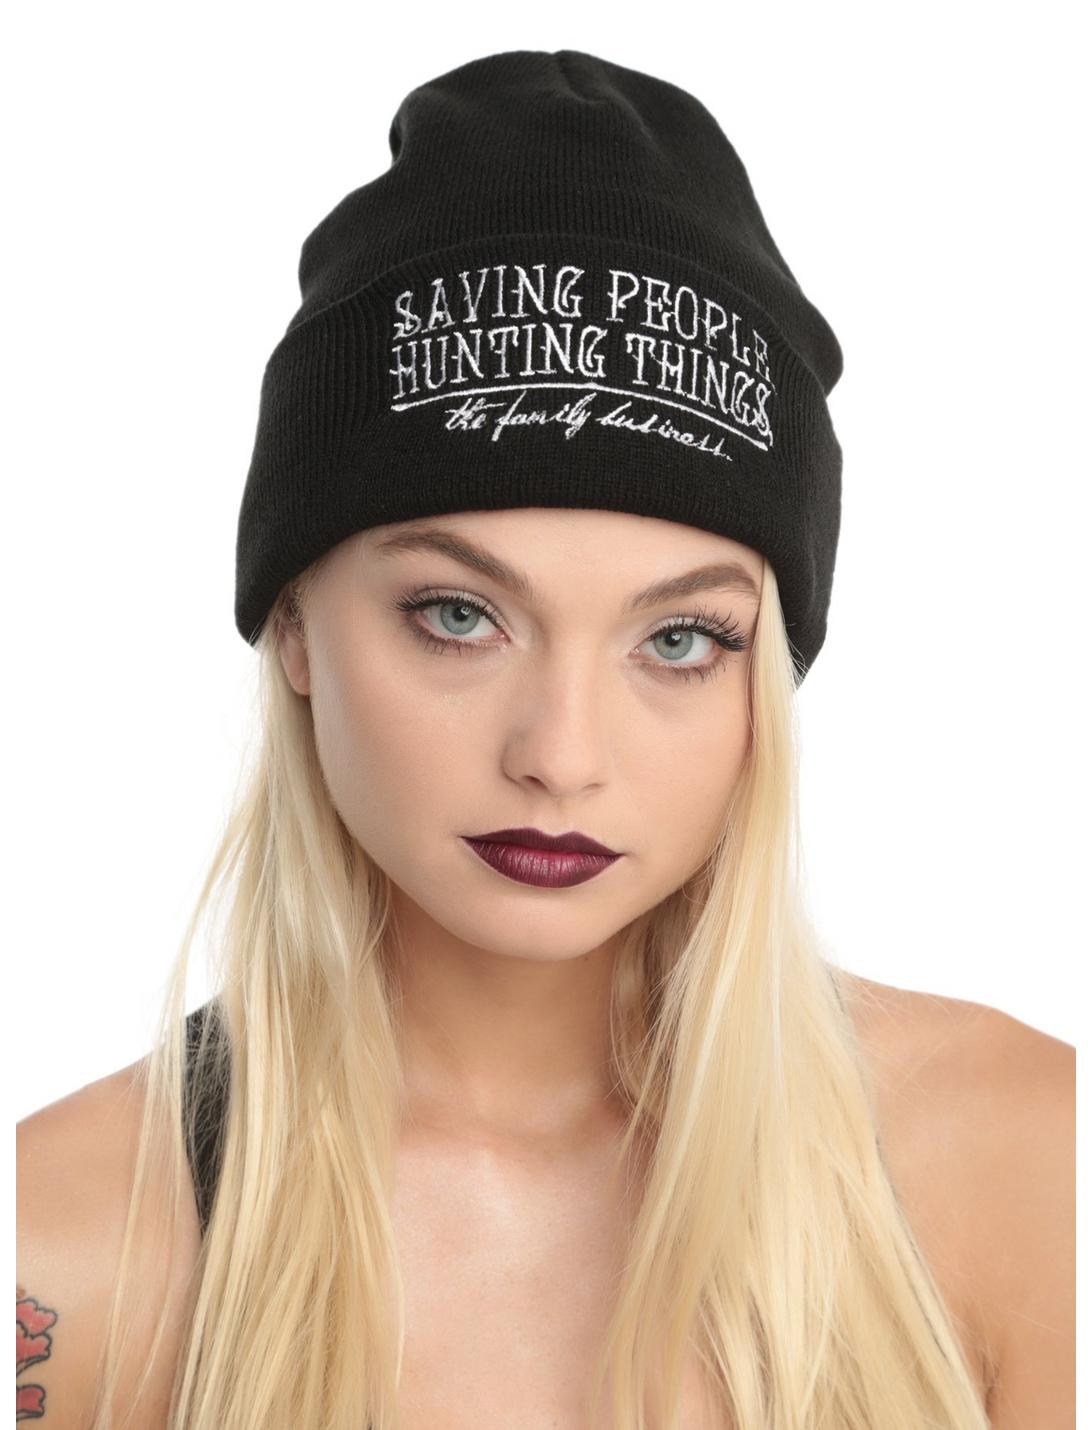 Supernatural Family Business Knit Beanie, , hi-res